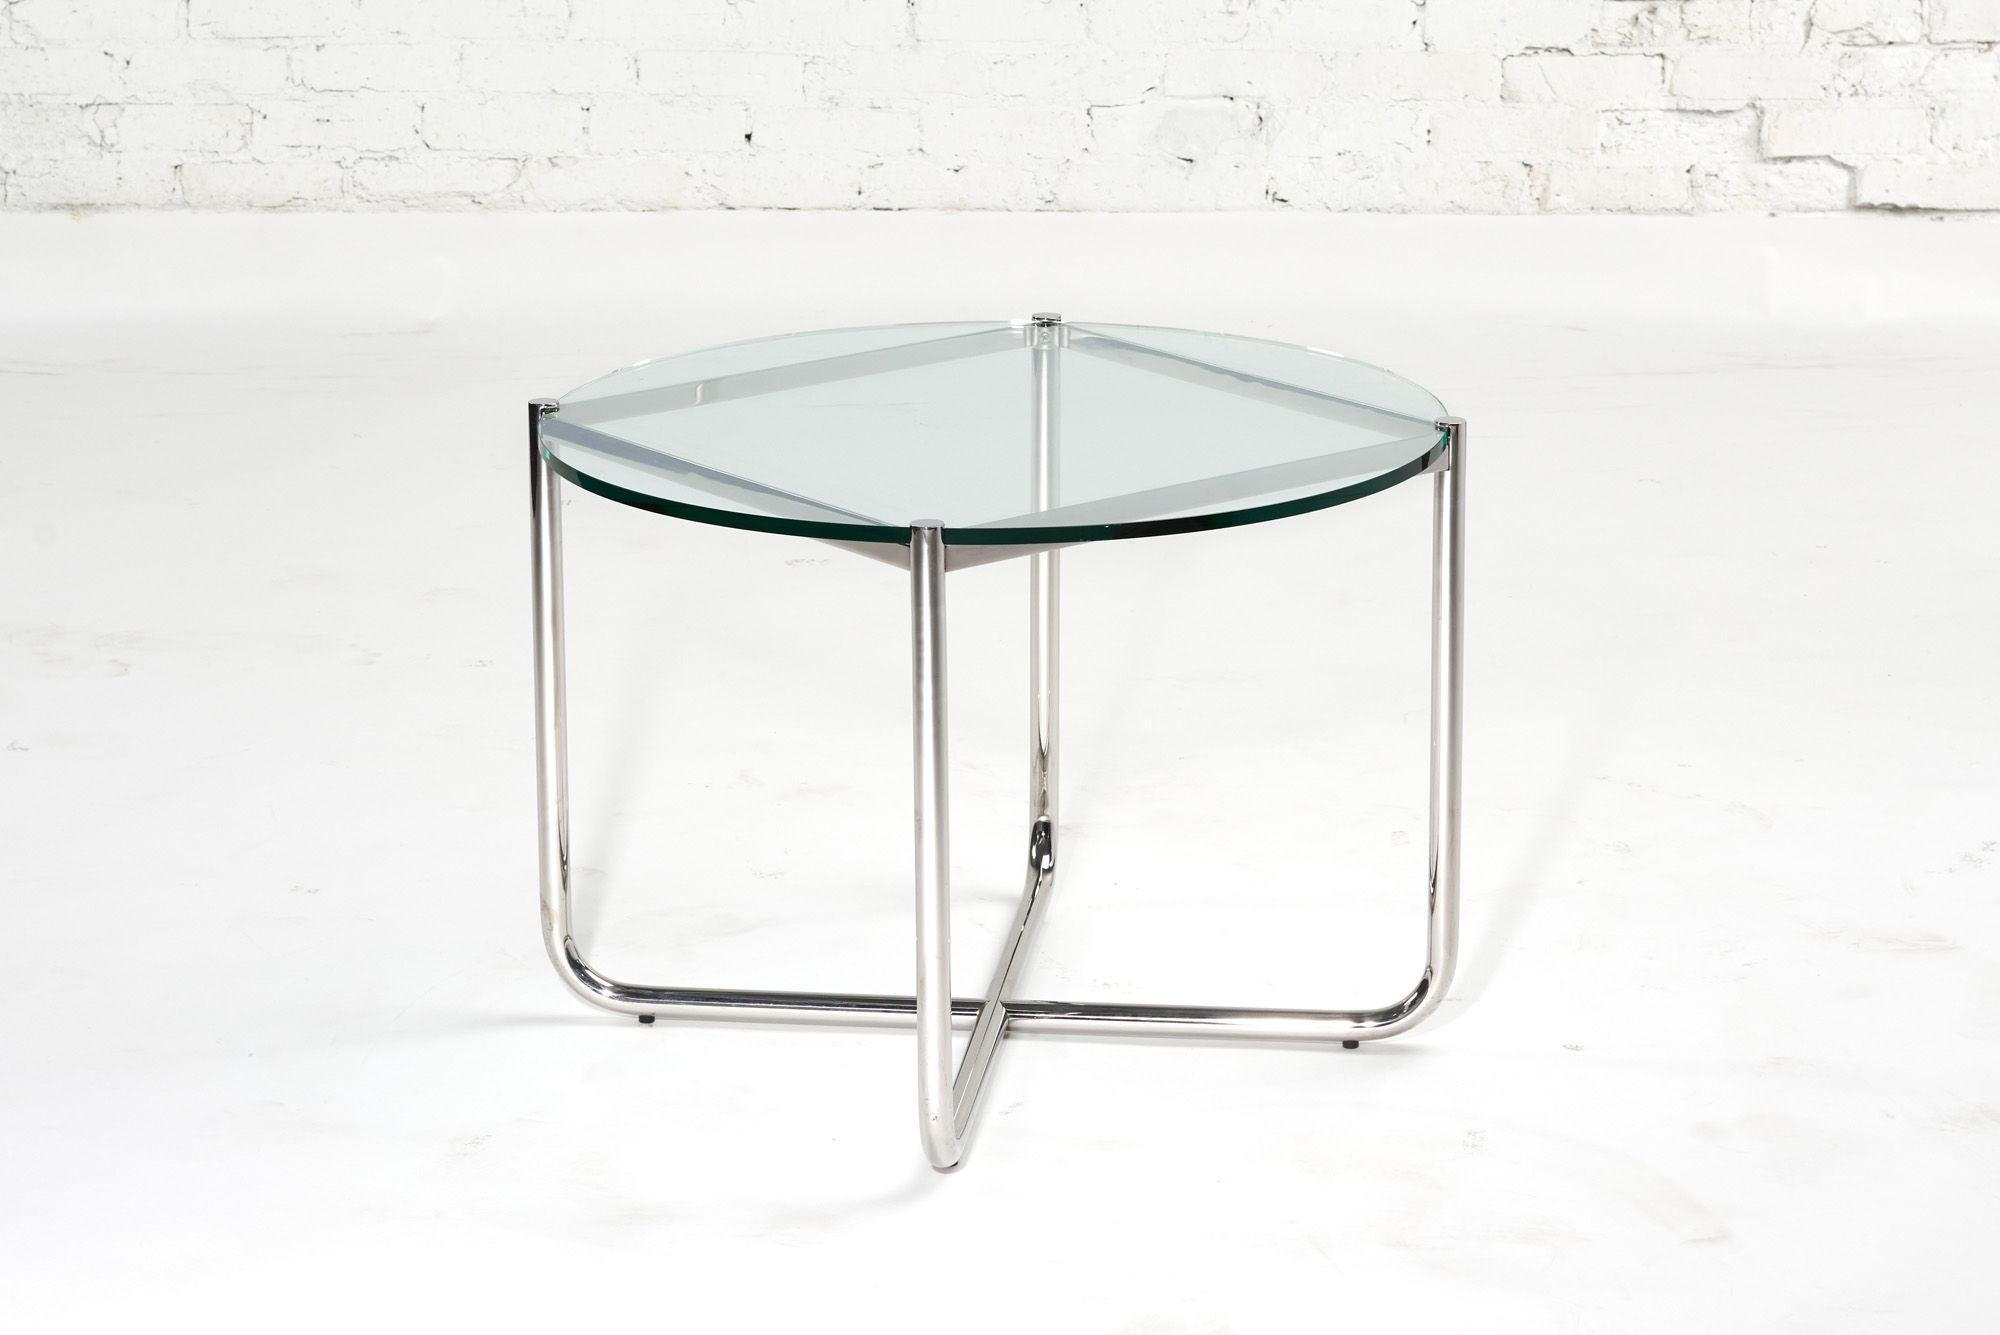  Mies van der Rohe Mr Side/End Tables Chrome and Glass for Knoll, 1970.  Excellent condition